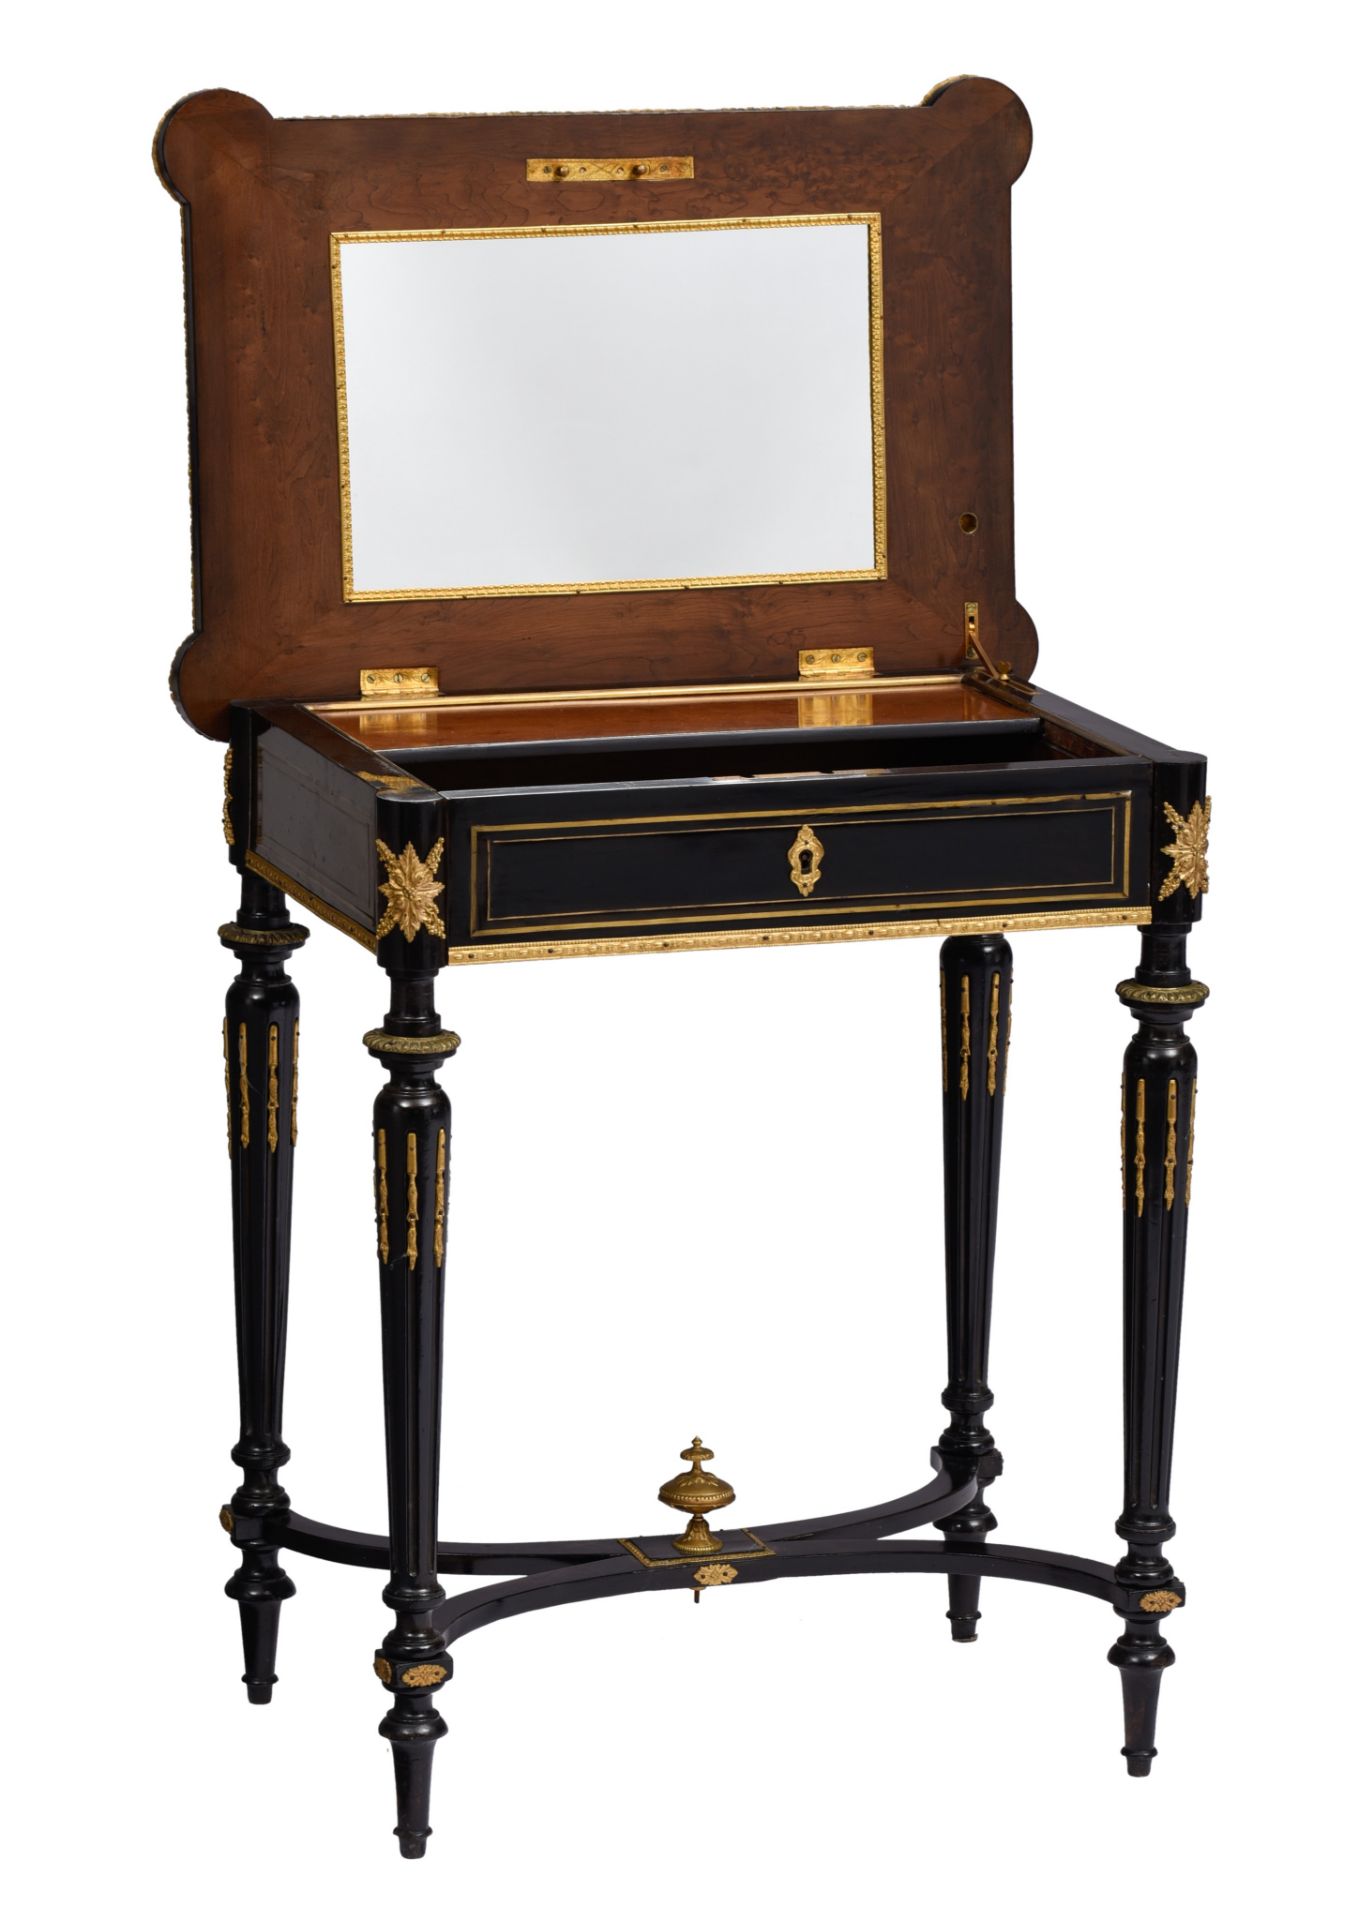 A Neoclassical Napoleon III ladies sewing table, H 73,5 - W 63 - D 44 cm - Image 8 of 11